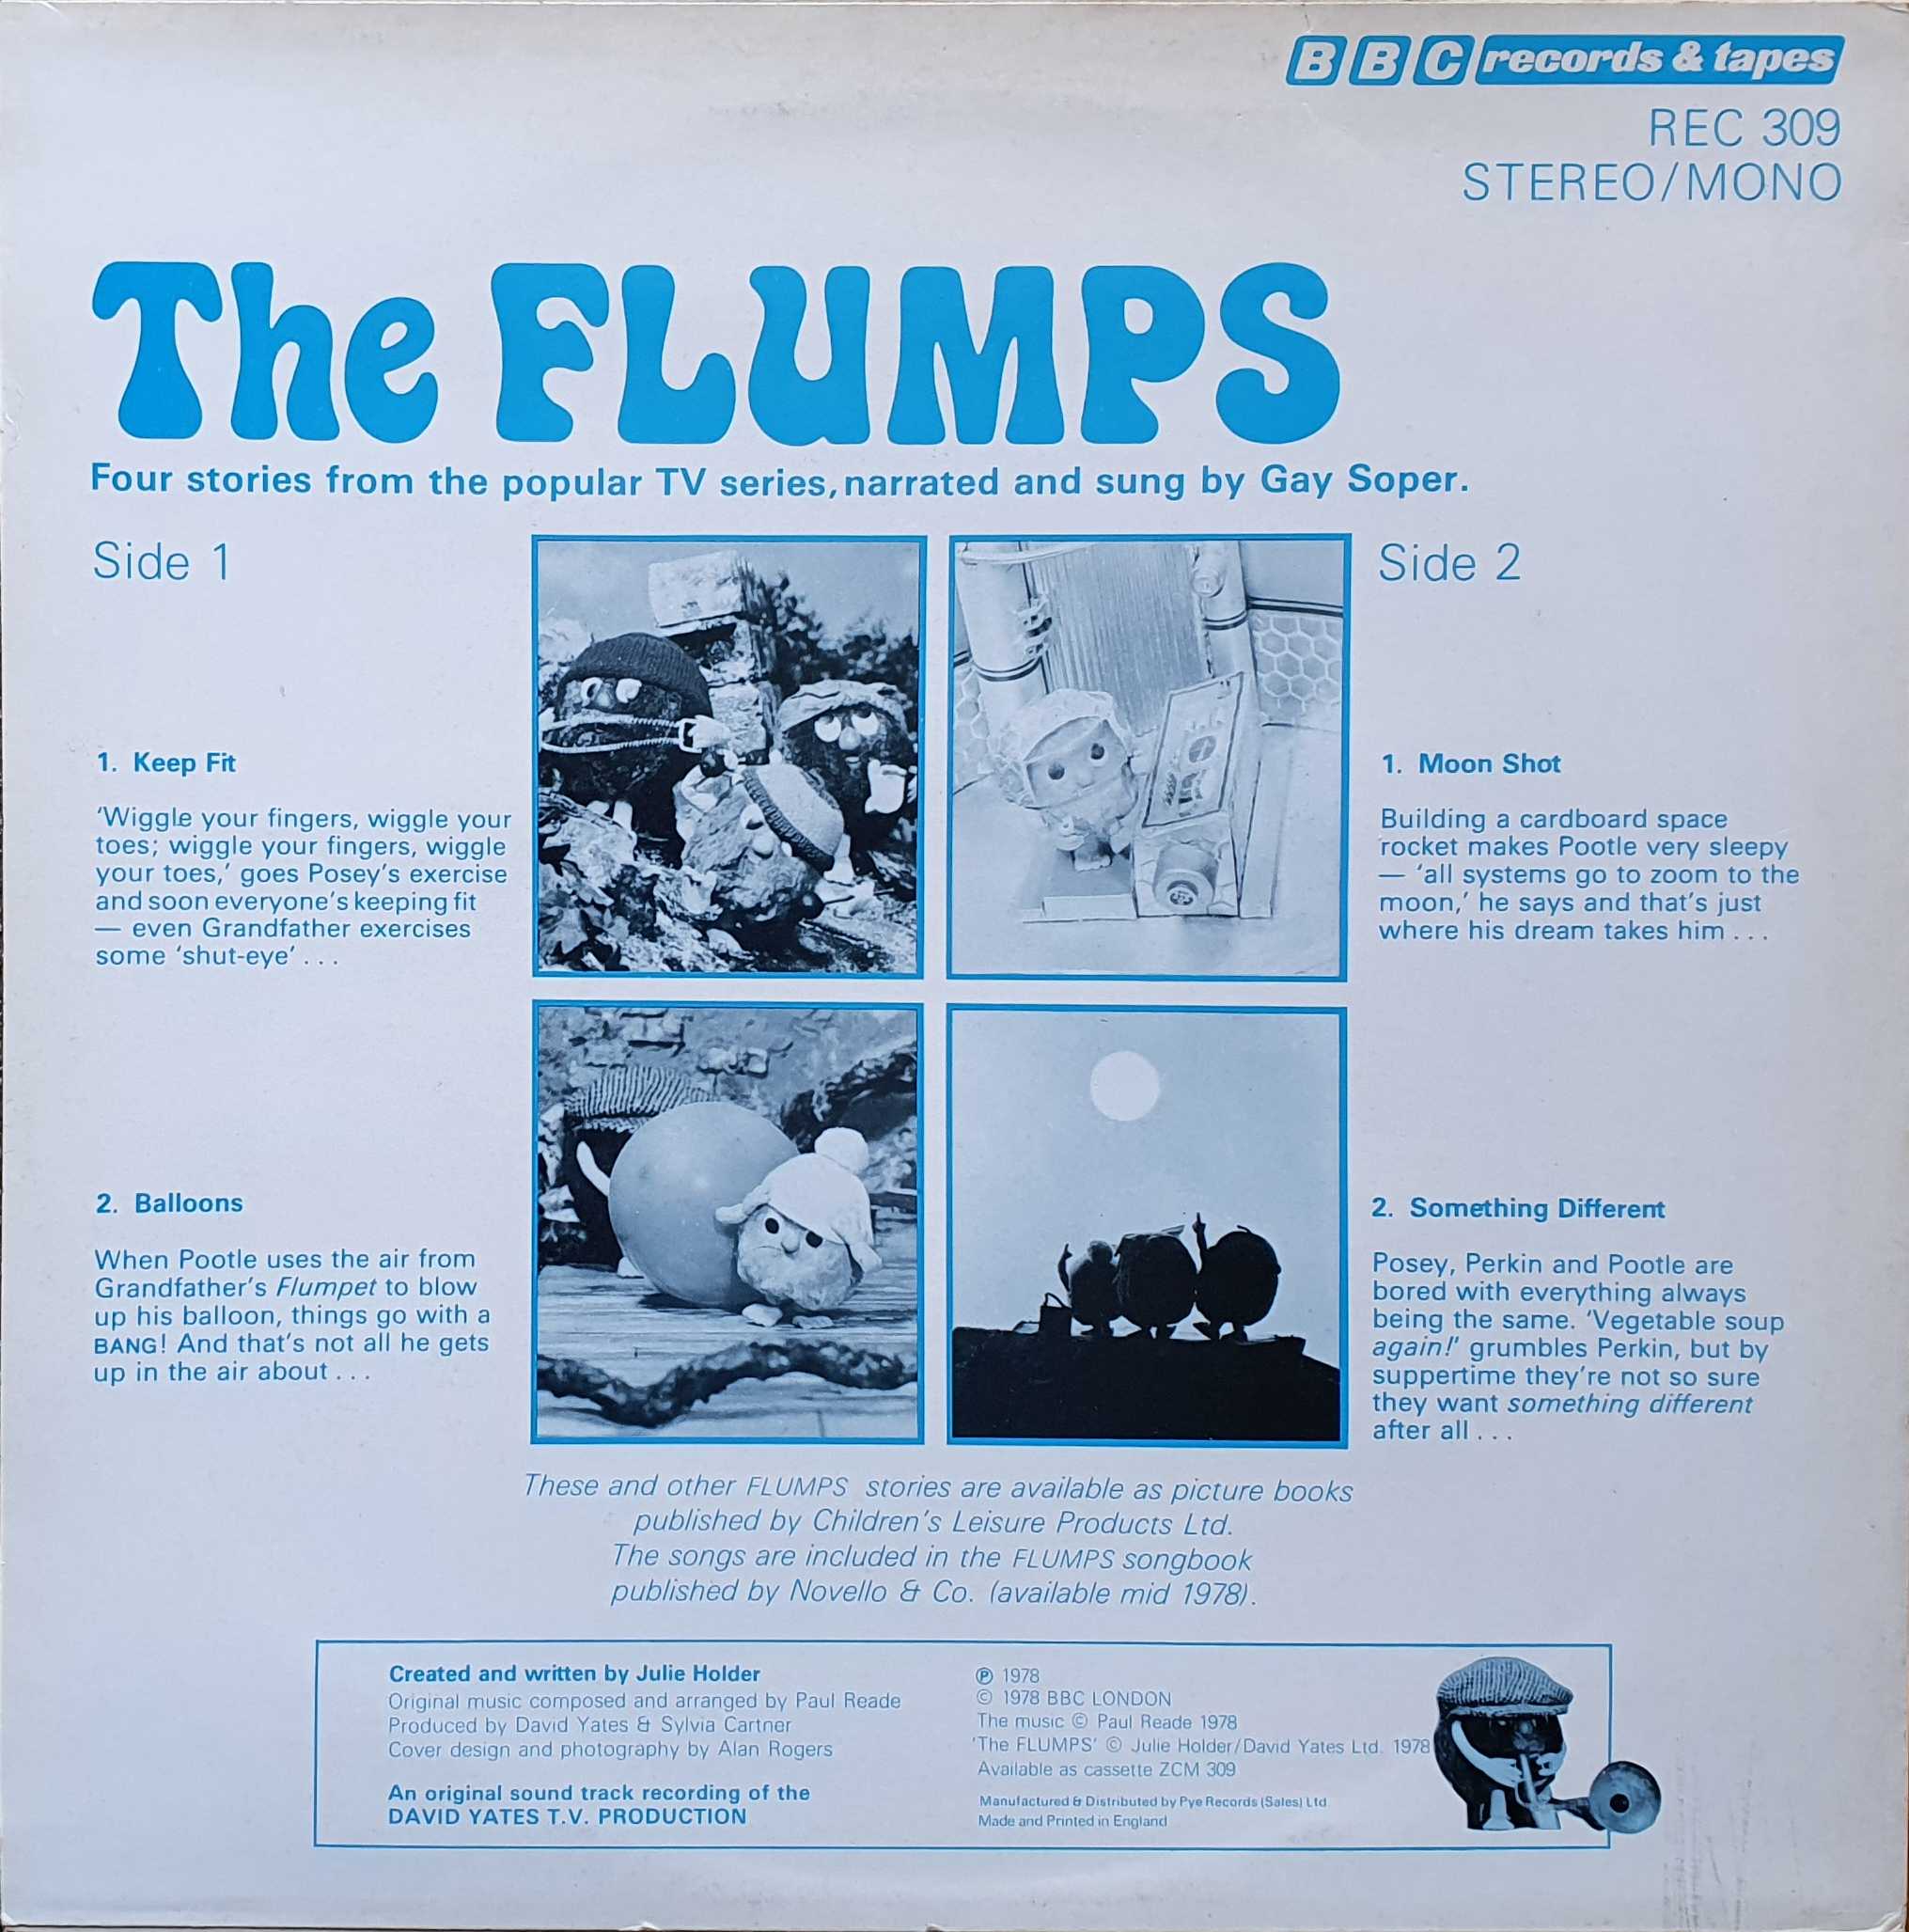 Picture of REC 309 The Flumps by artist Julie Holder from the BBC records and Tapes library